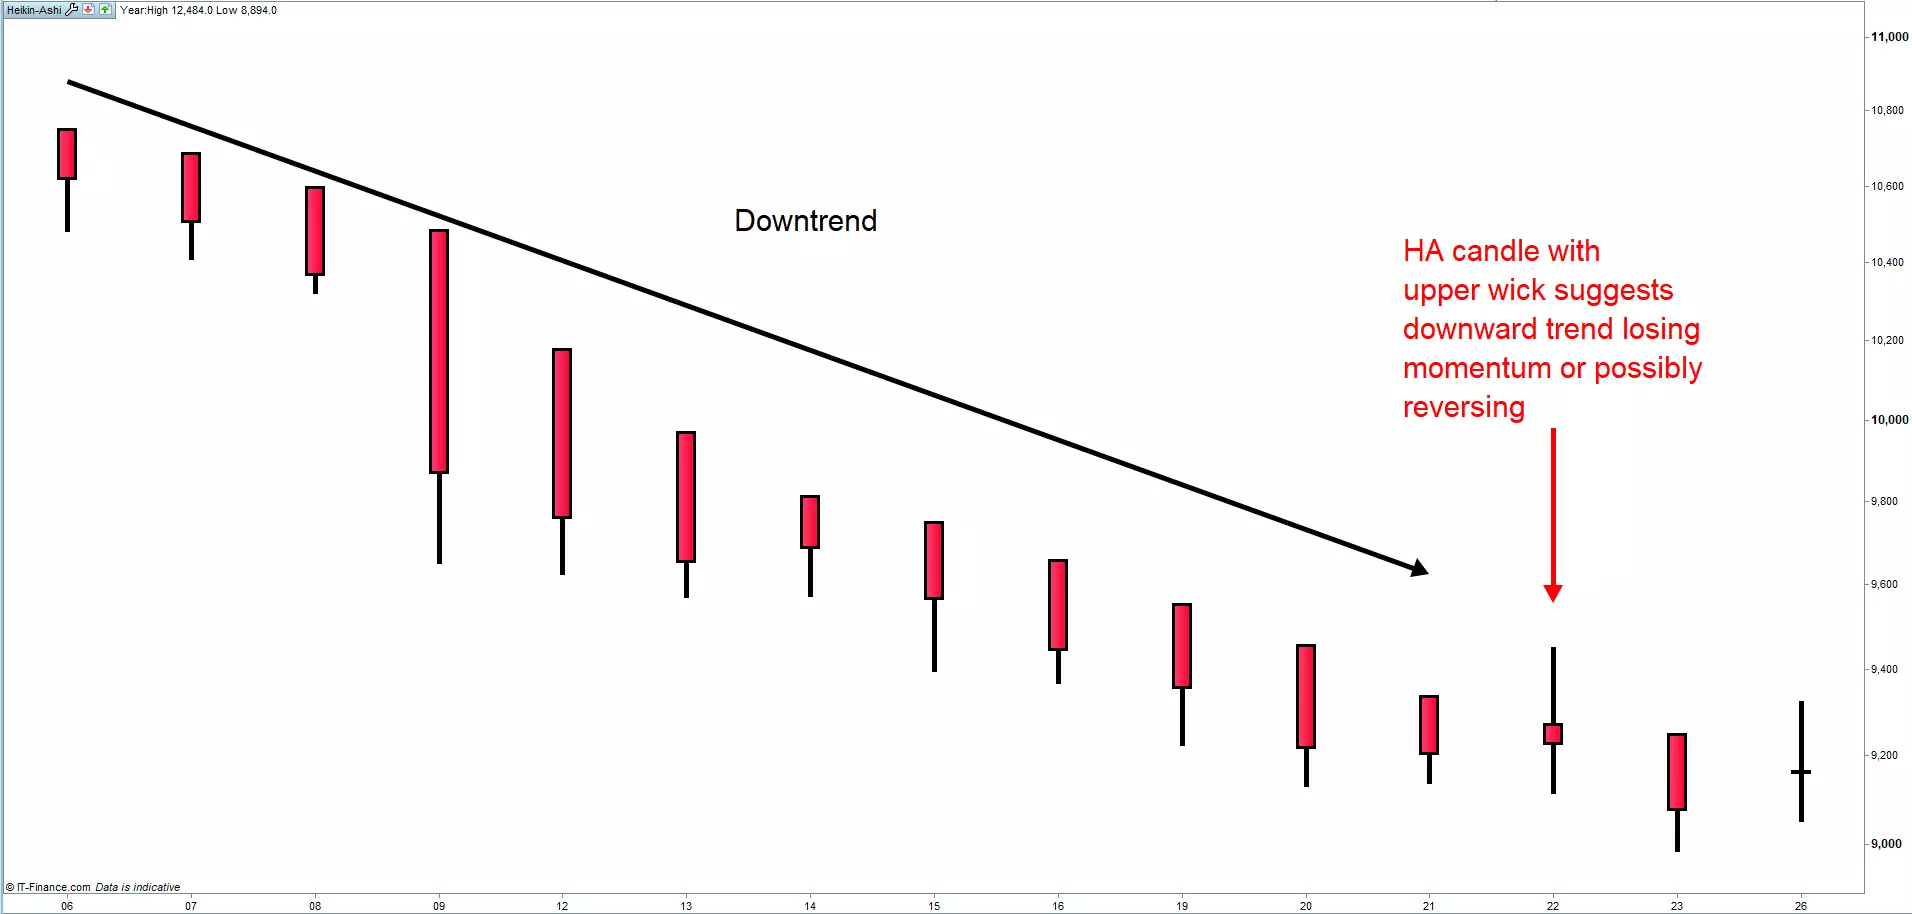 Downtrend with lower and upper wick